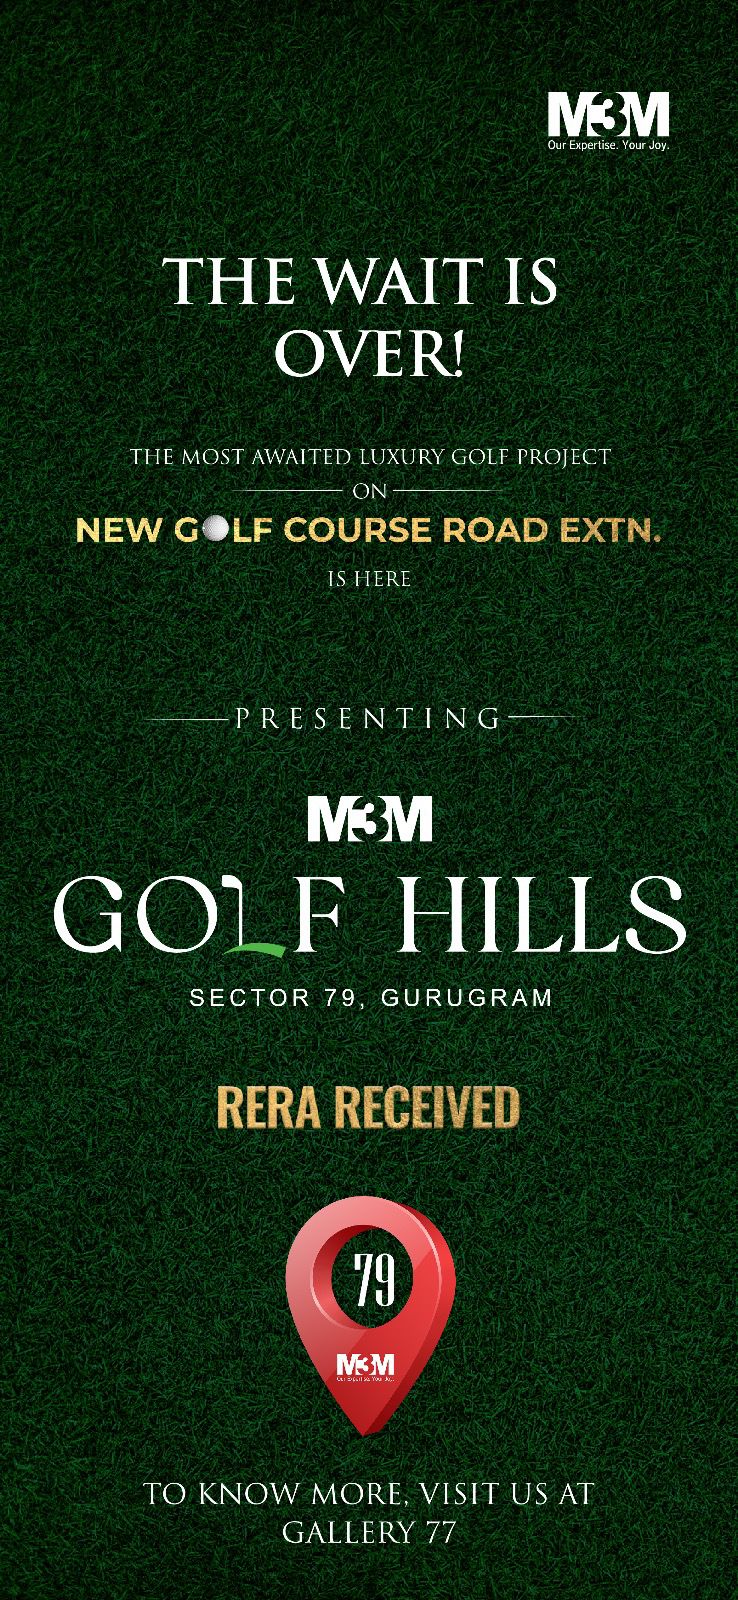 Freehold 4 Bedroom Floors For Sale in M3M Golf Hills, Sector 79, Gurgaon